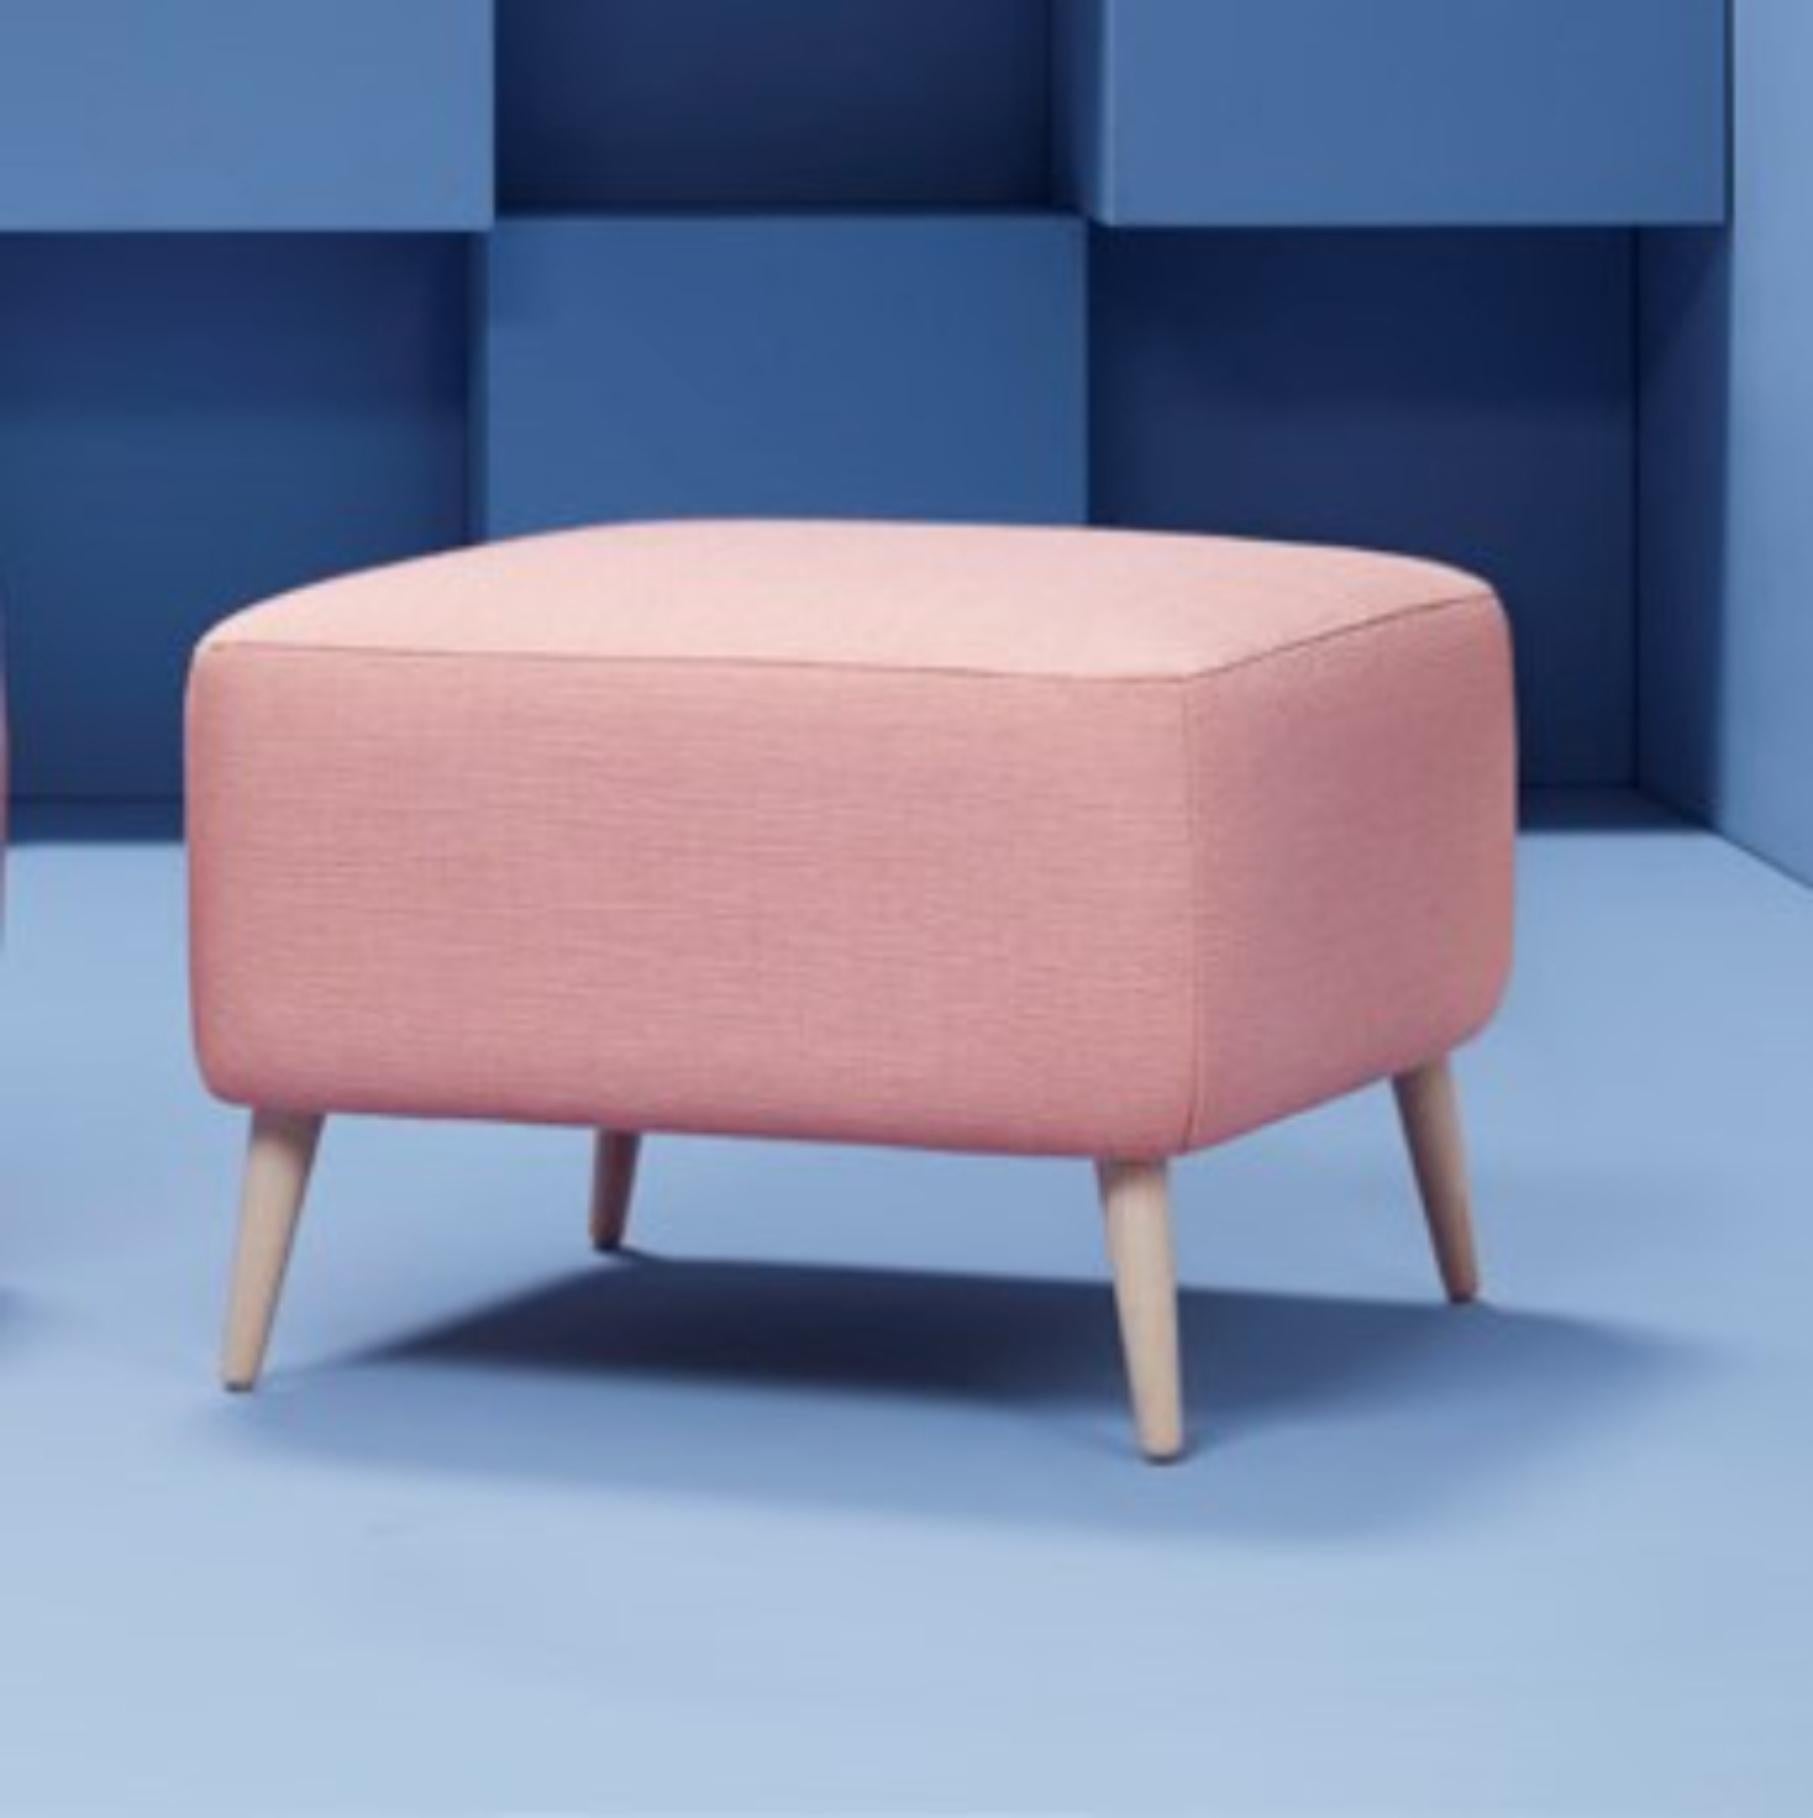 Alice ottoman - Round by Pepe Albargues 
Dimensions: W54, D54, H41
Materials: Pine wood structure reinforced with plywood and tablex.
Foam CMHR (high resilience and flame retardant) for all our cushion filling systems.
Beech wooden legs.

Also